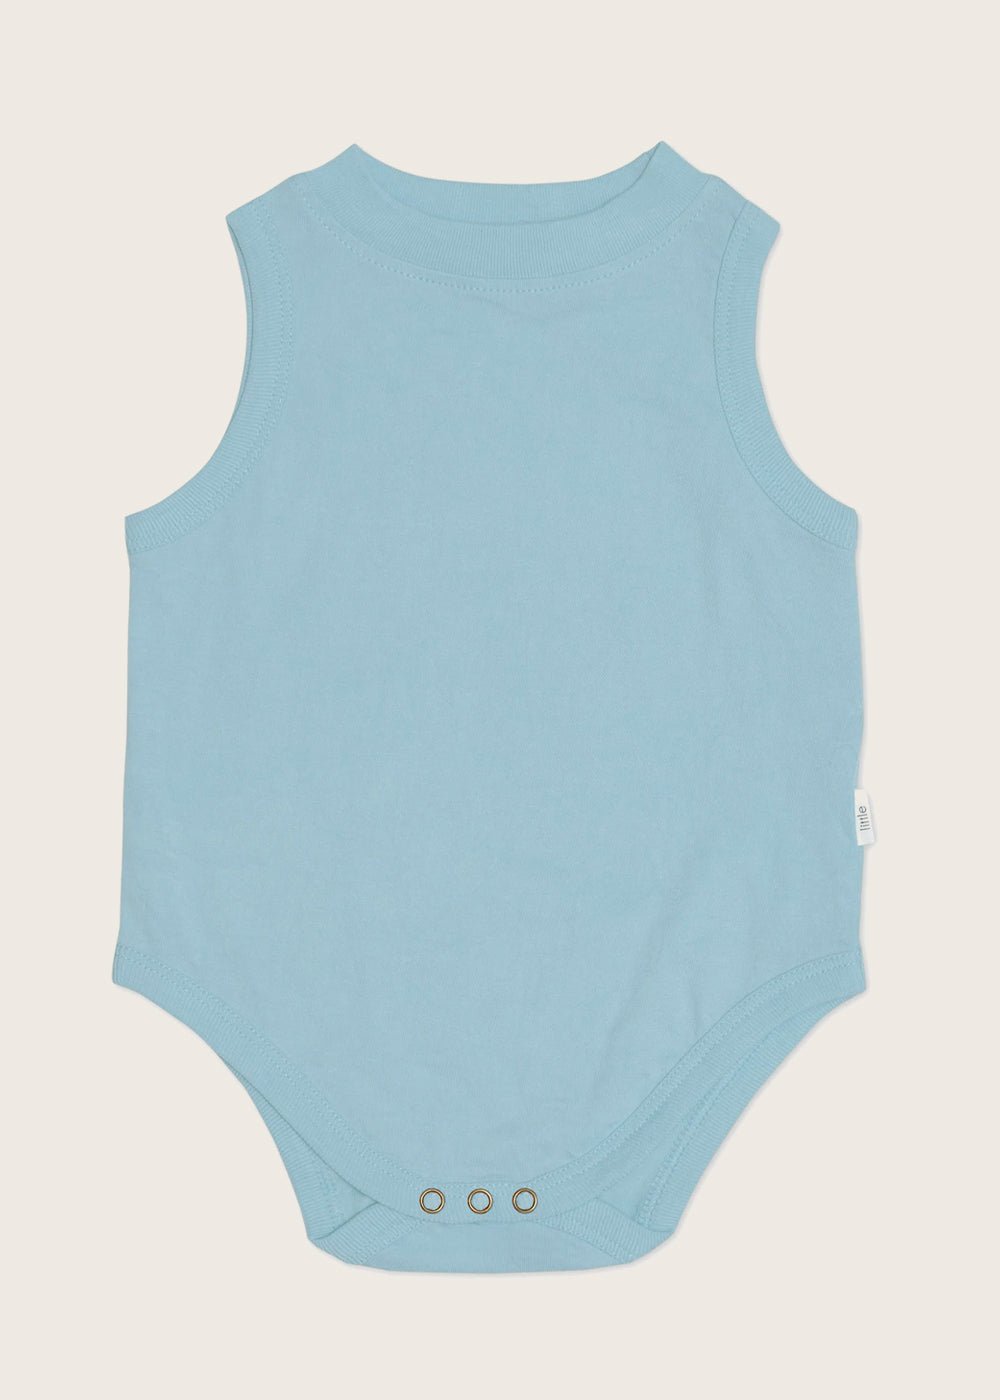 Little Elinor by NICO Powder Blue Baby Singlet Onesie - New Classics Studios Sustainable Ethical Fashion Canada